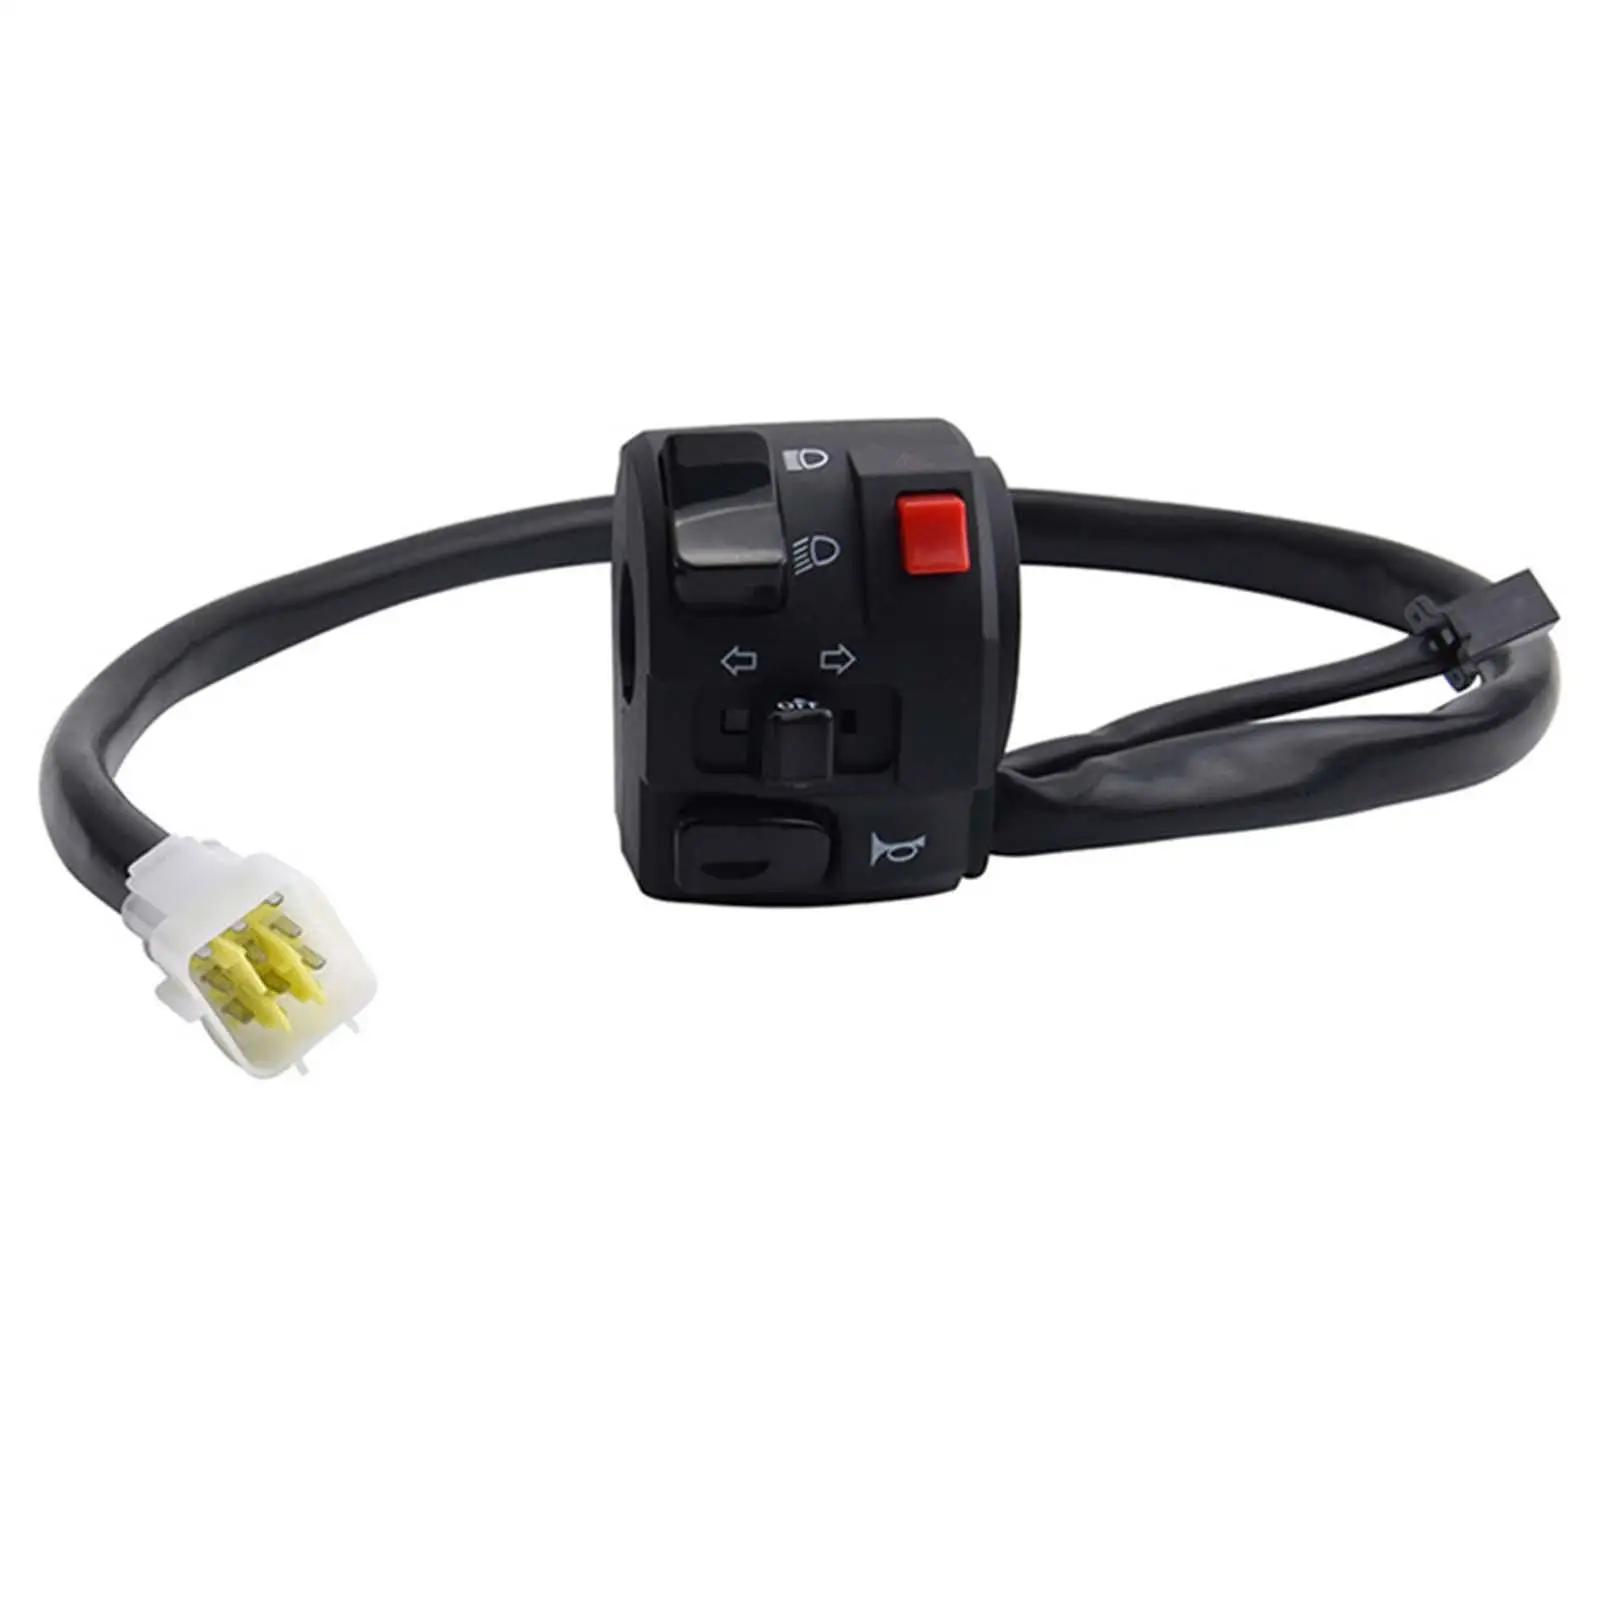 Handlebar Control Switch Headlight Control Replaces Horn 7/8 inch 22mm Motorcycle Switch